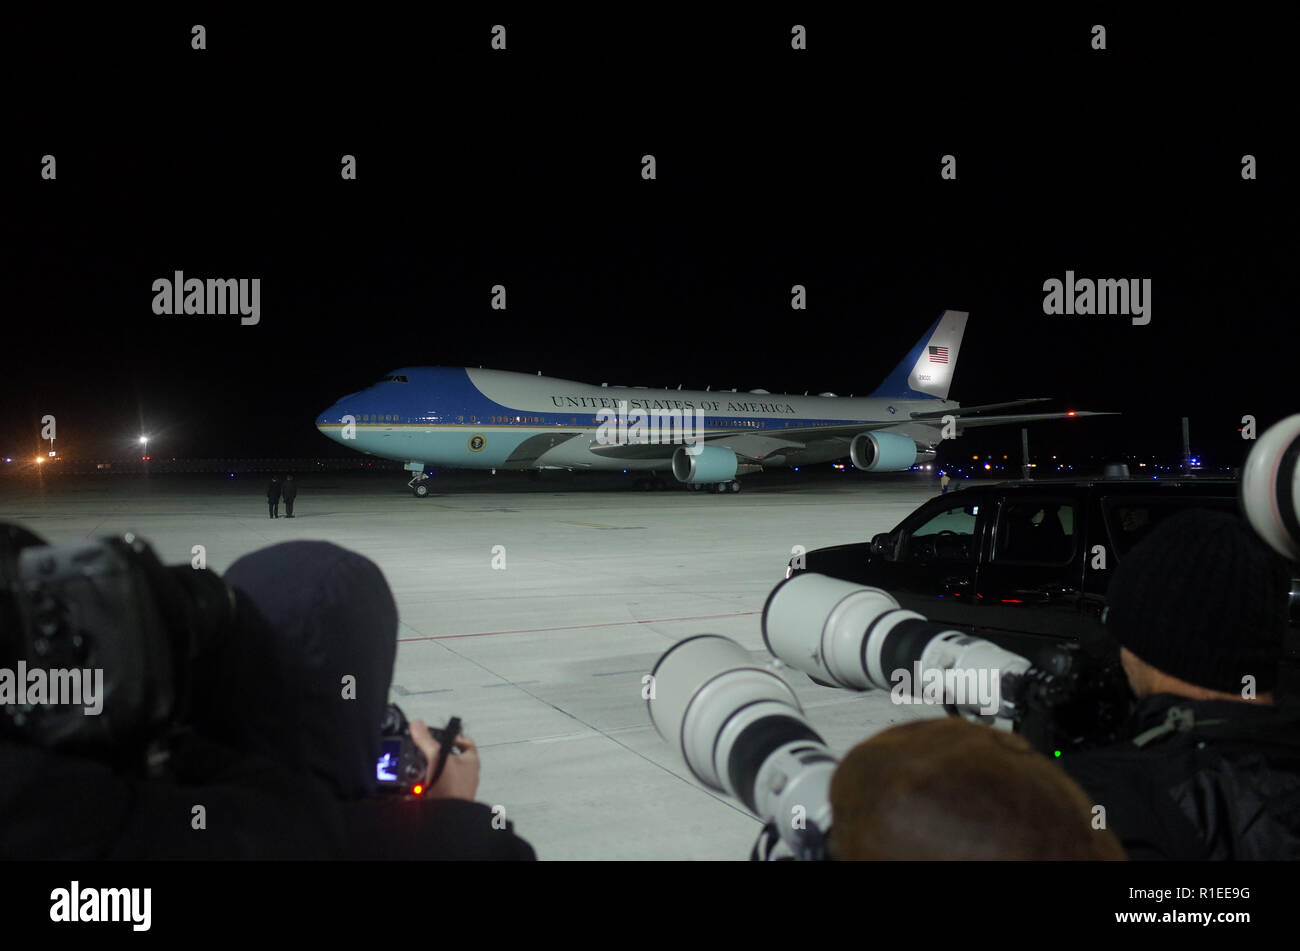 November 09, 2018 - Paris, France: French press photographers wait as US Air Force One arrives in the airport of Paris Orly. Le president americain Donald Trump et son epouse Melania descendent de l'Air Force One a leur arrivee a l'aeroport d'Orly. *** FRANCE OUT / NO SALES TO FRENCH MEDIA *** Stock Photo